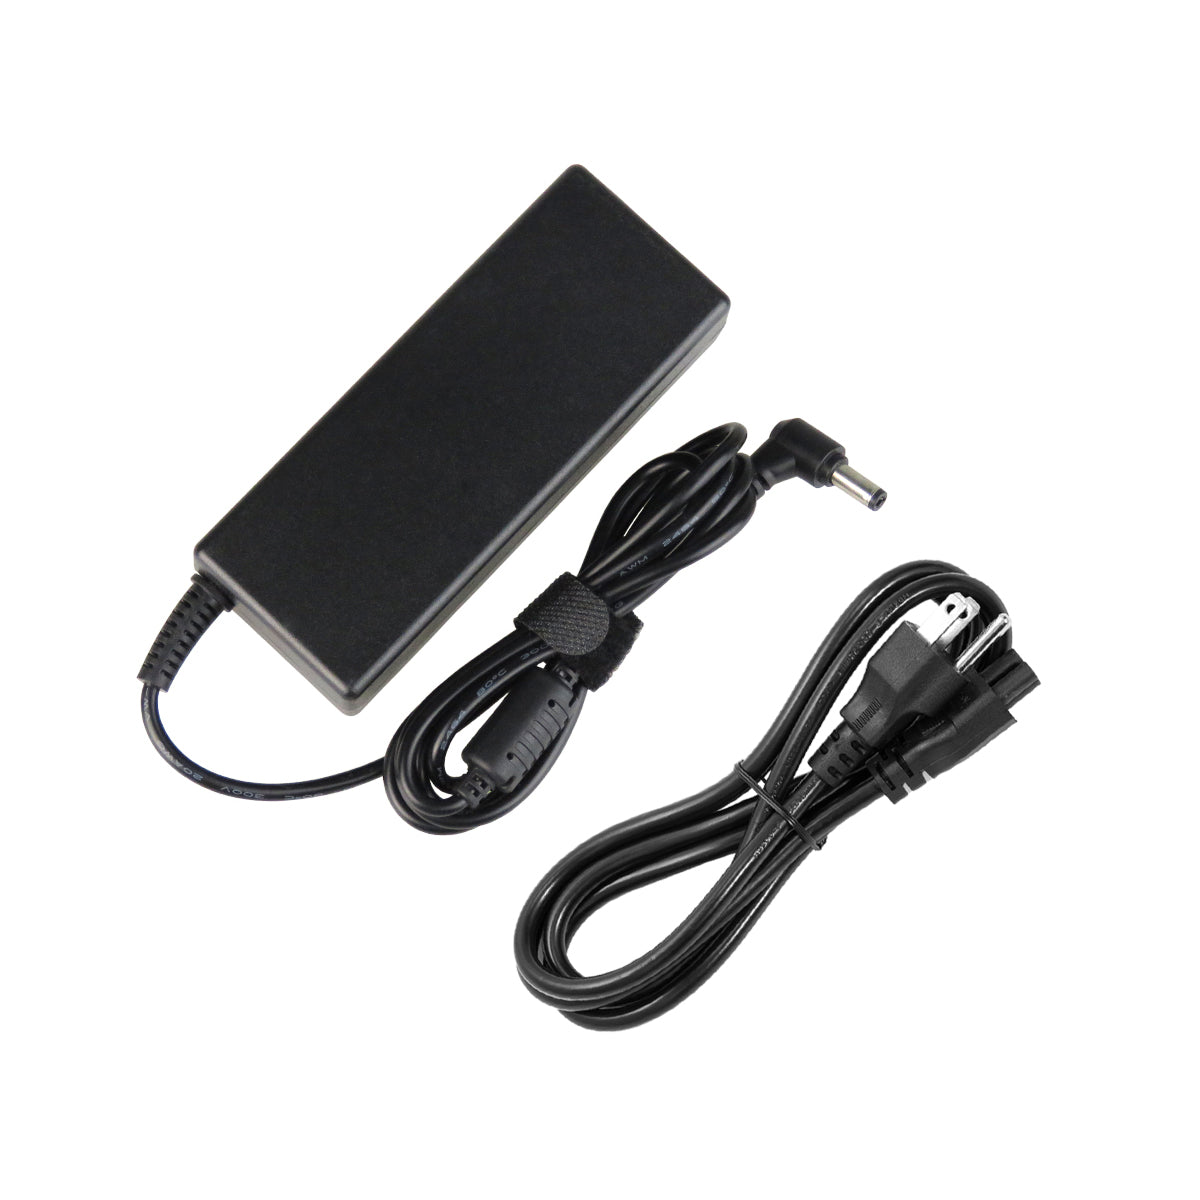 AC Adapter Charger for ASUS A43E Notebook.